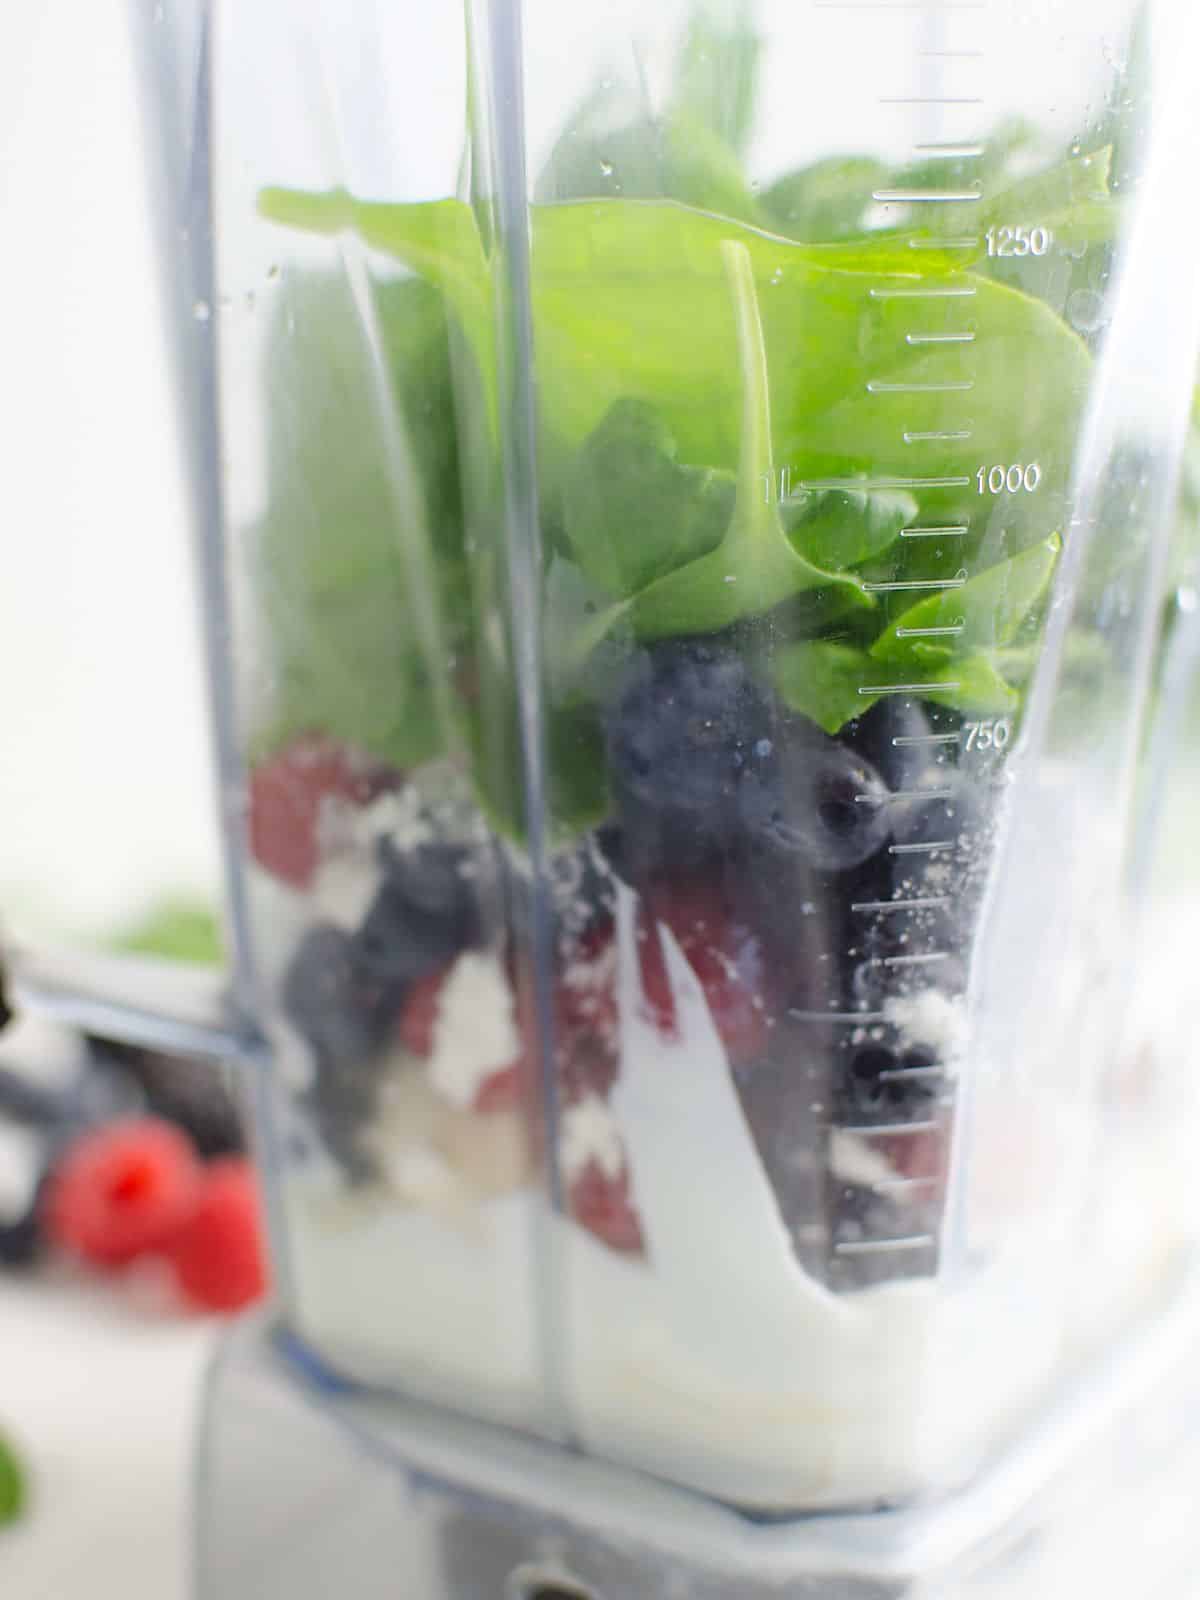 Spinach, berries, yogurt, and other smoothie ingredients in a blender prior to blending. 